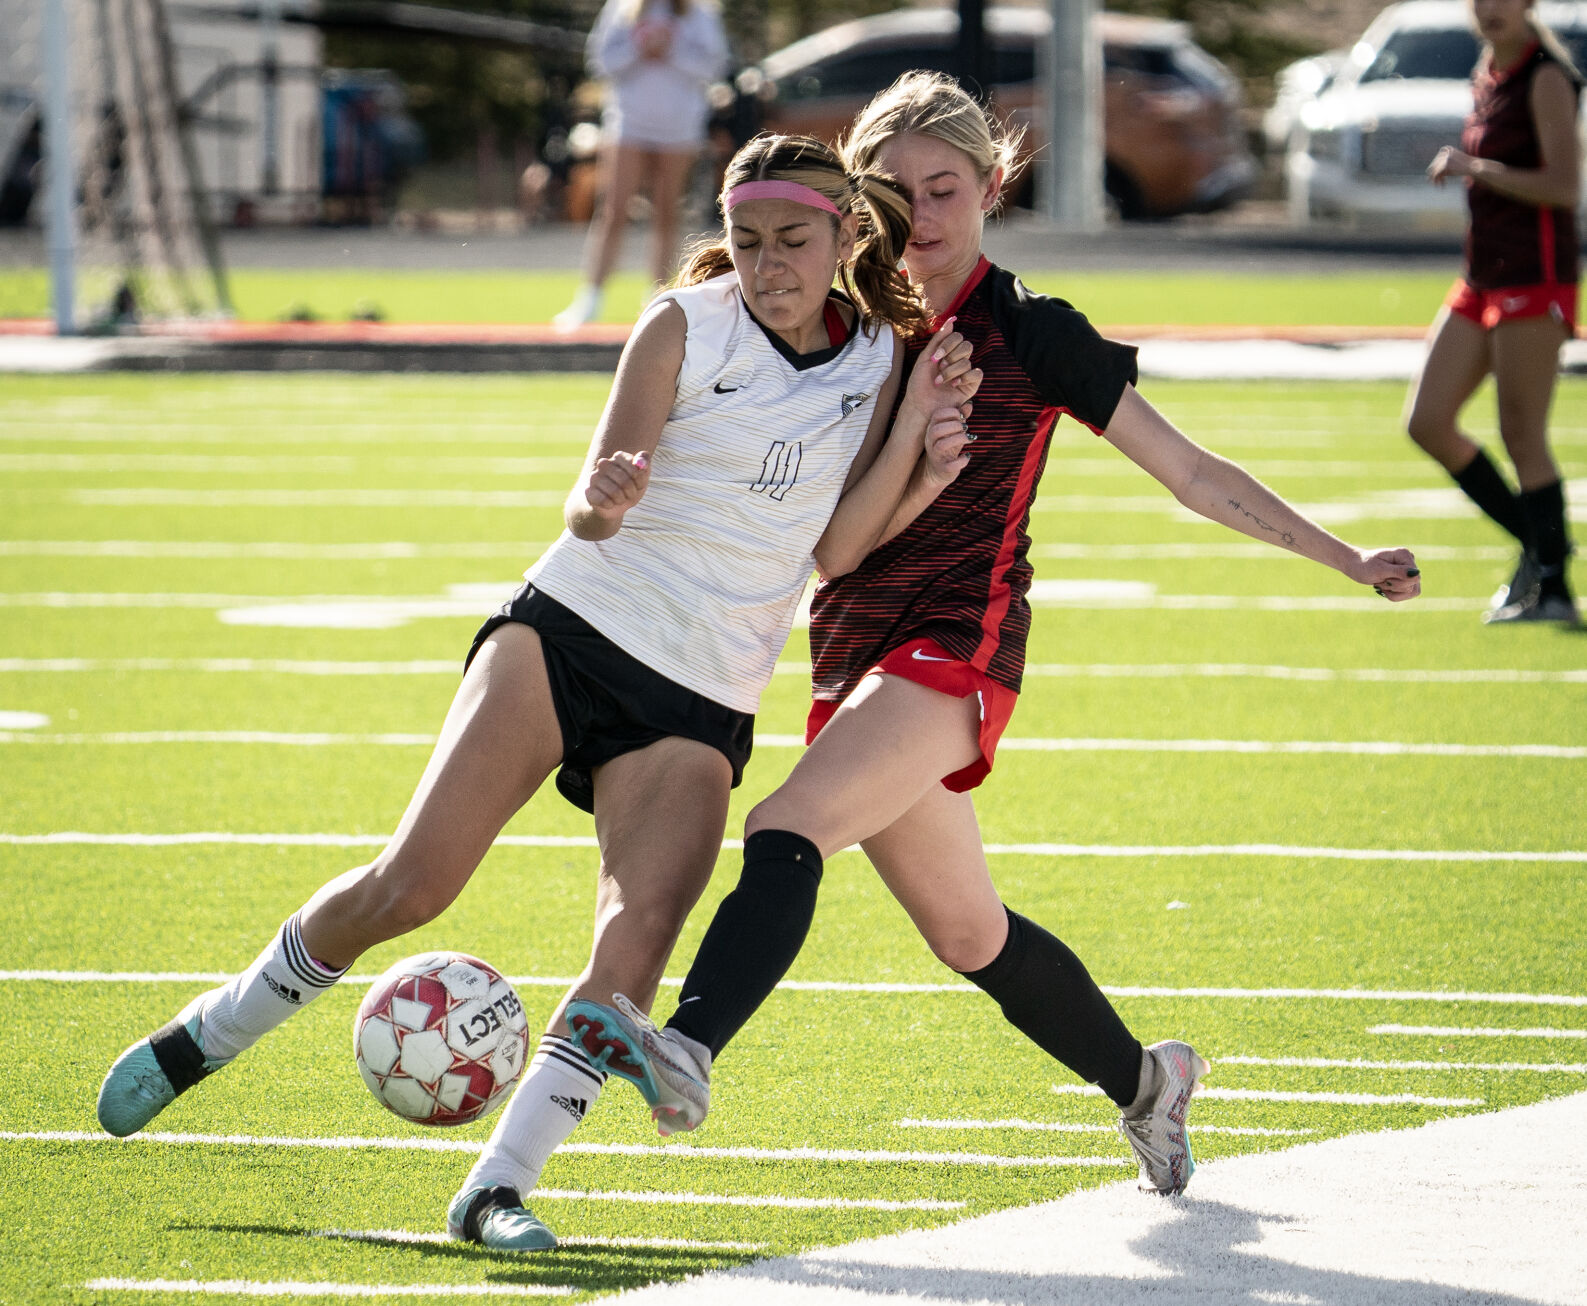 South’s Emma Cortez Scores Late Equalizer to Draw Central in Intense Match